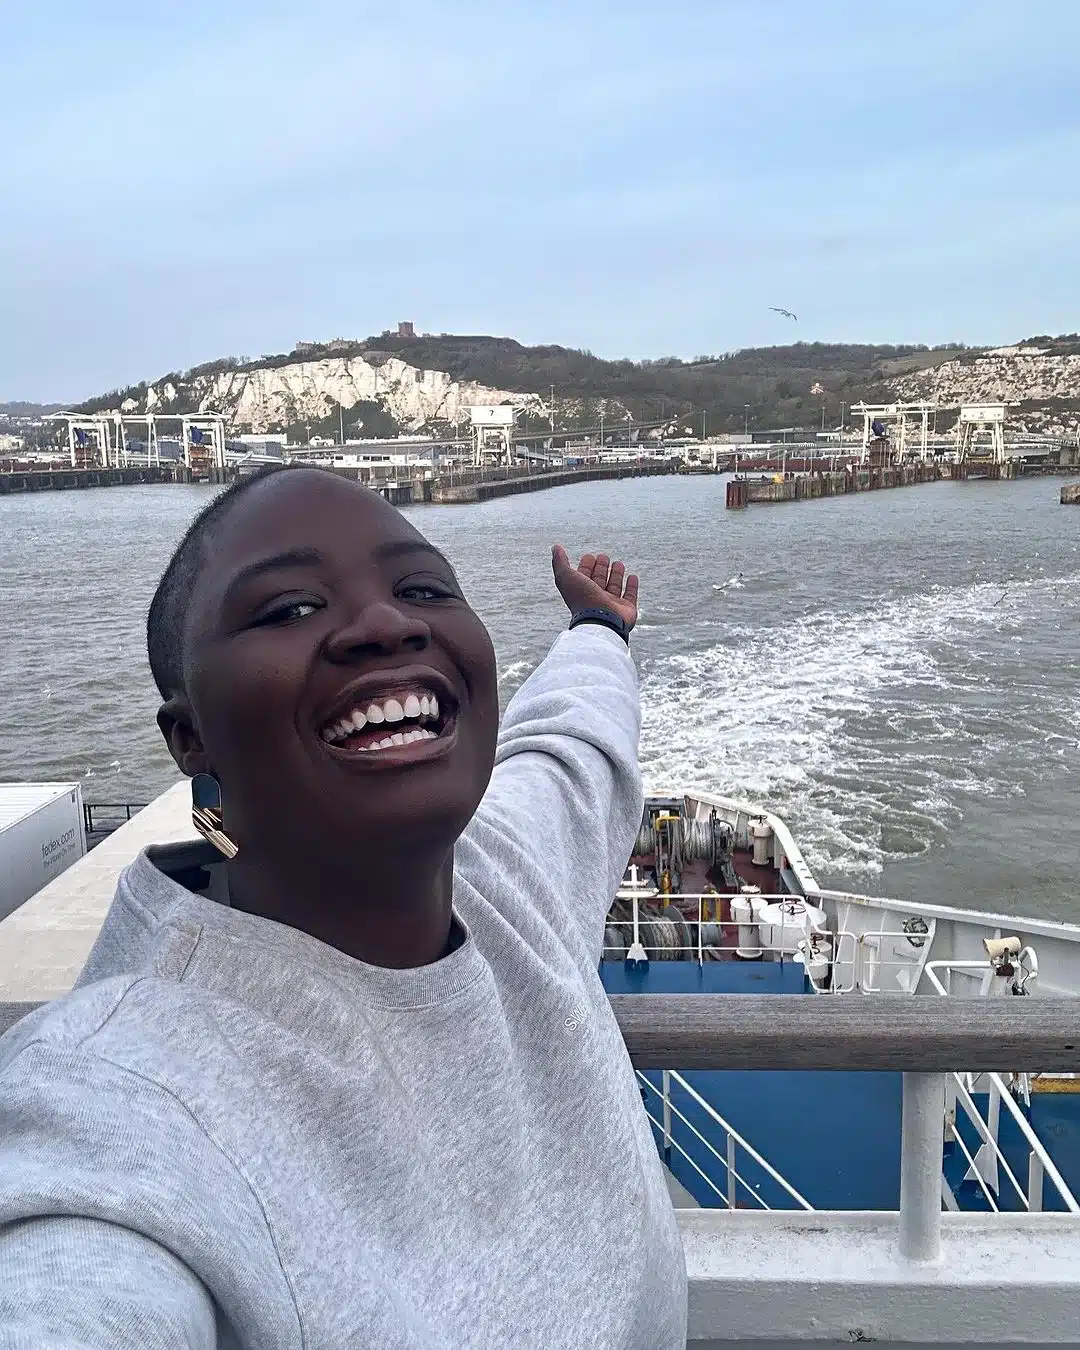 "I've entered France" - Lady driving car from London to Lagos ferries across the English Channel 